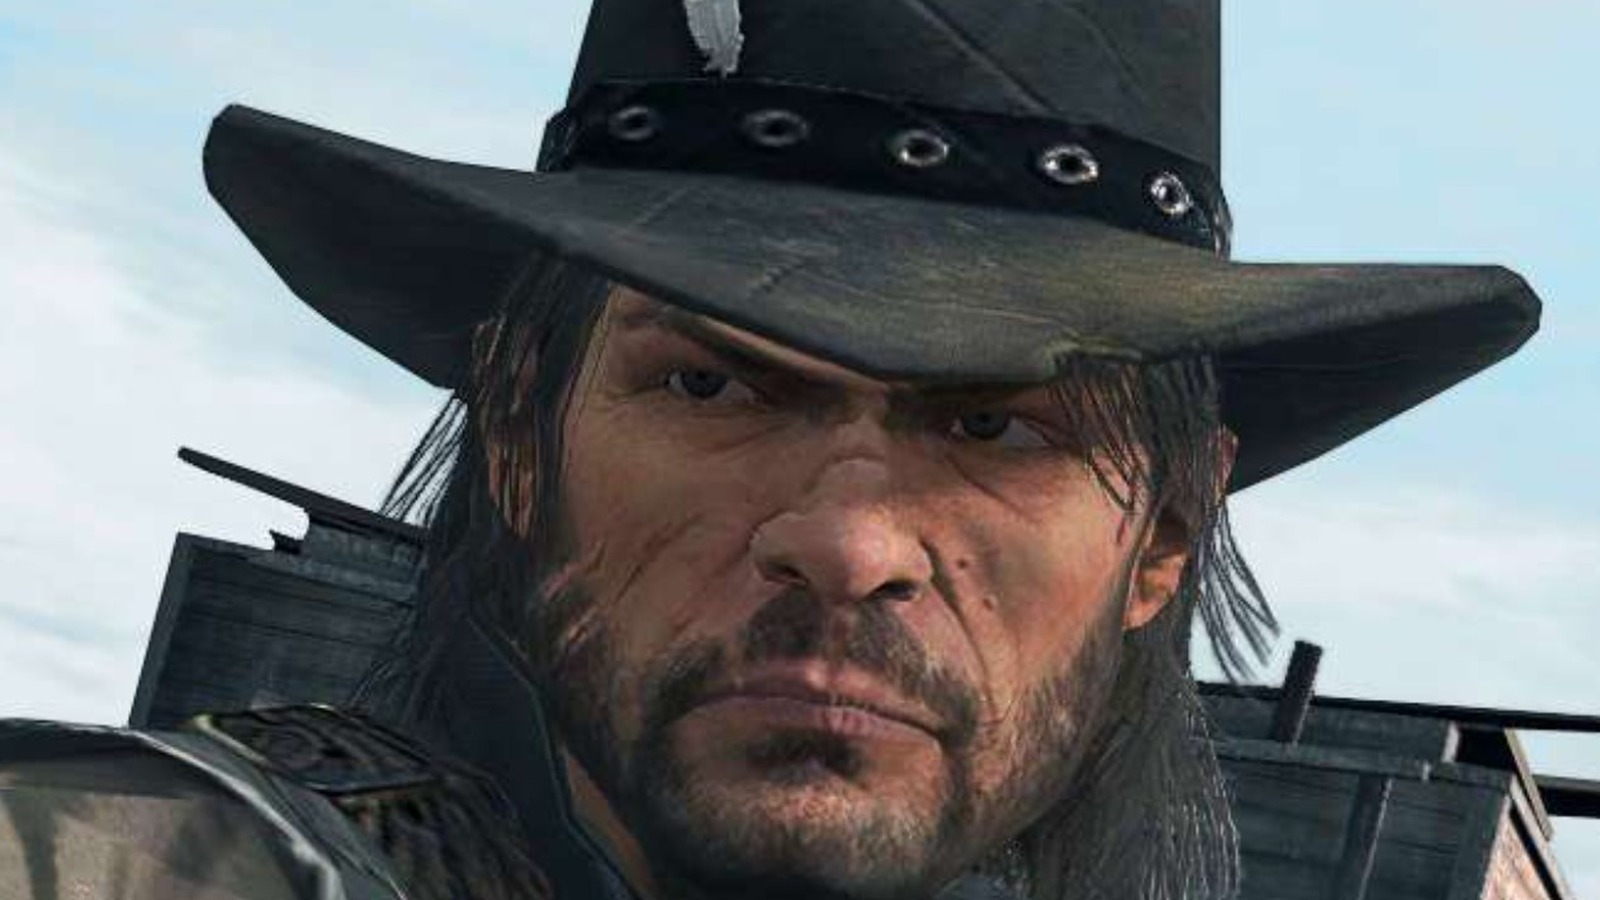 Rumor: Red Dead Redemption Remake in the Works